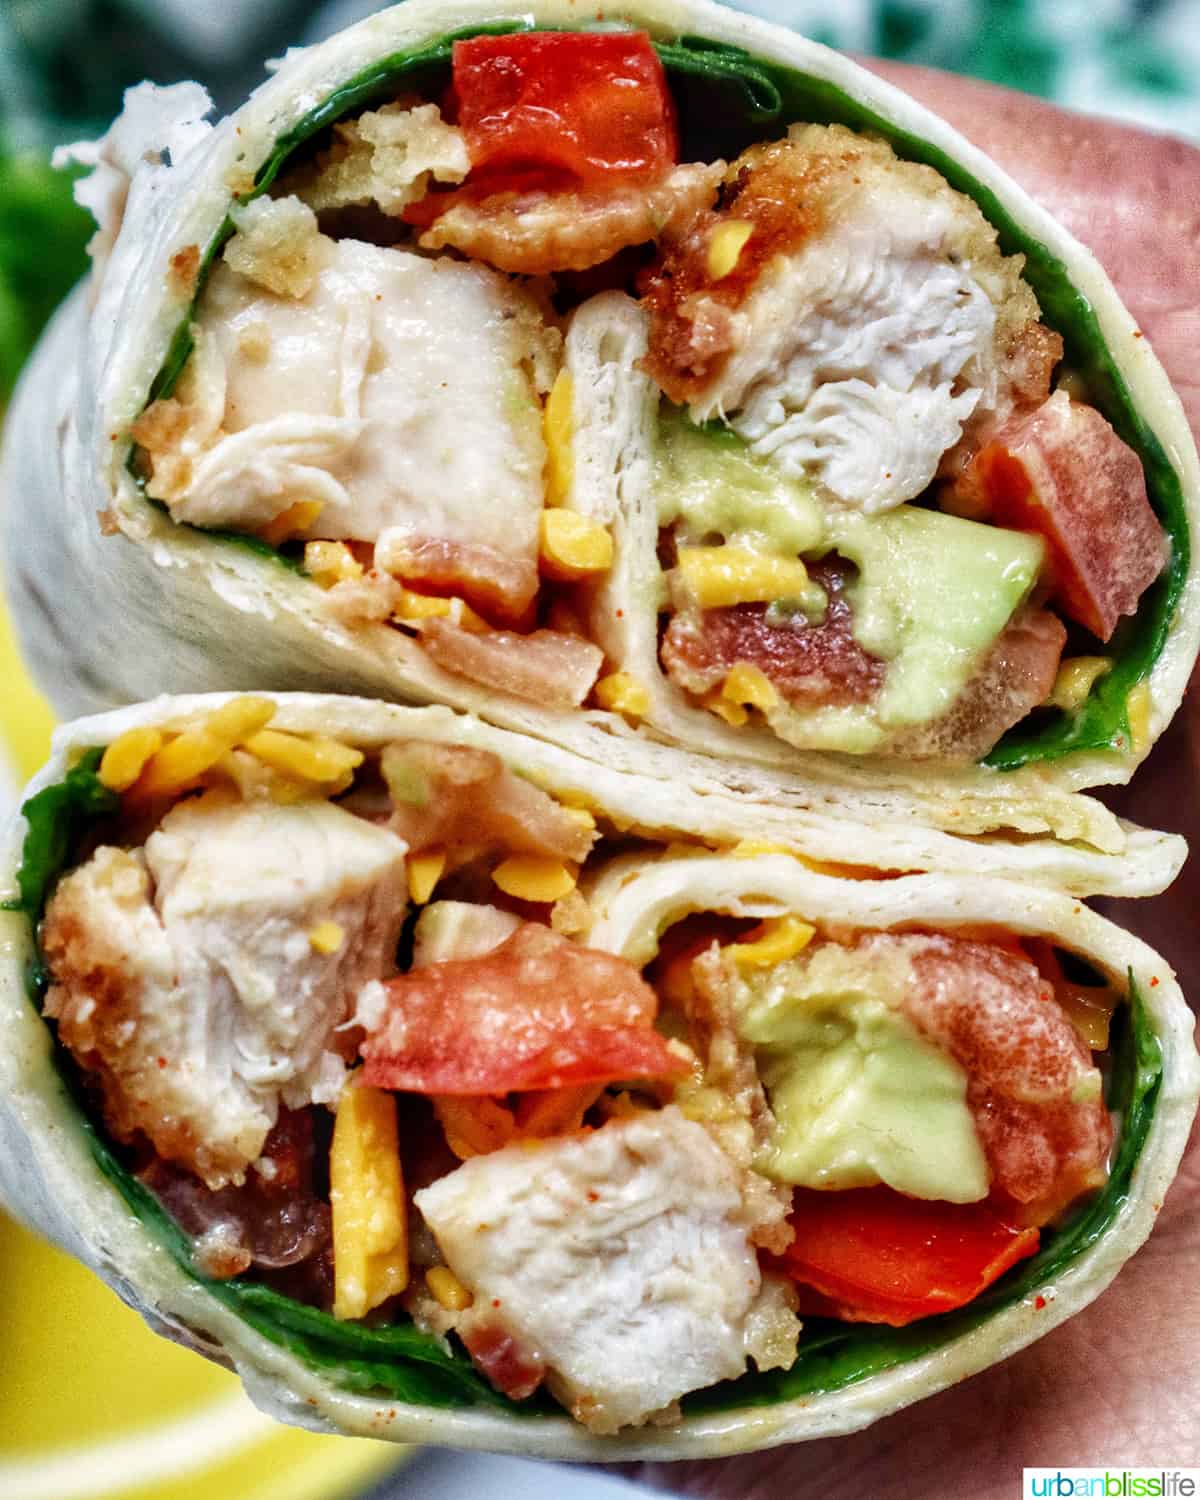 honey mustard chicken wraps sliced in half with the middle exposed.